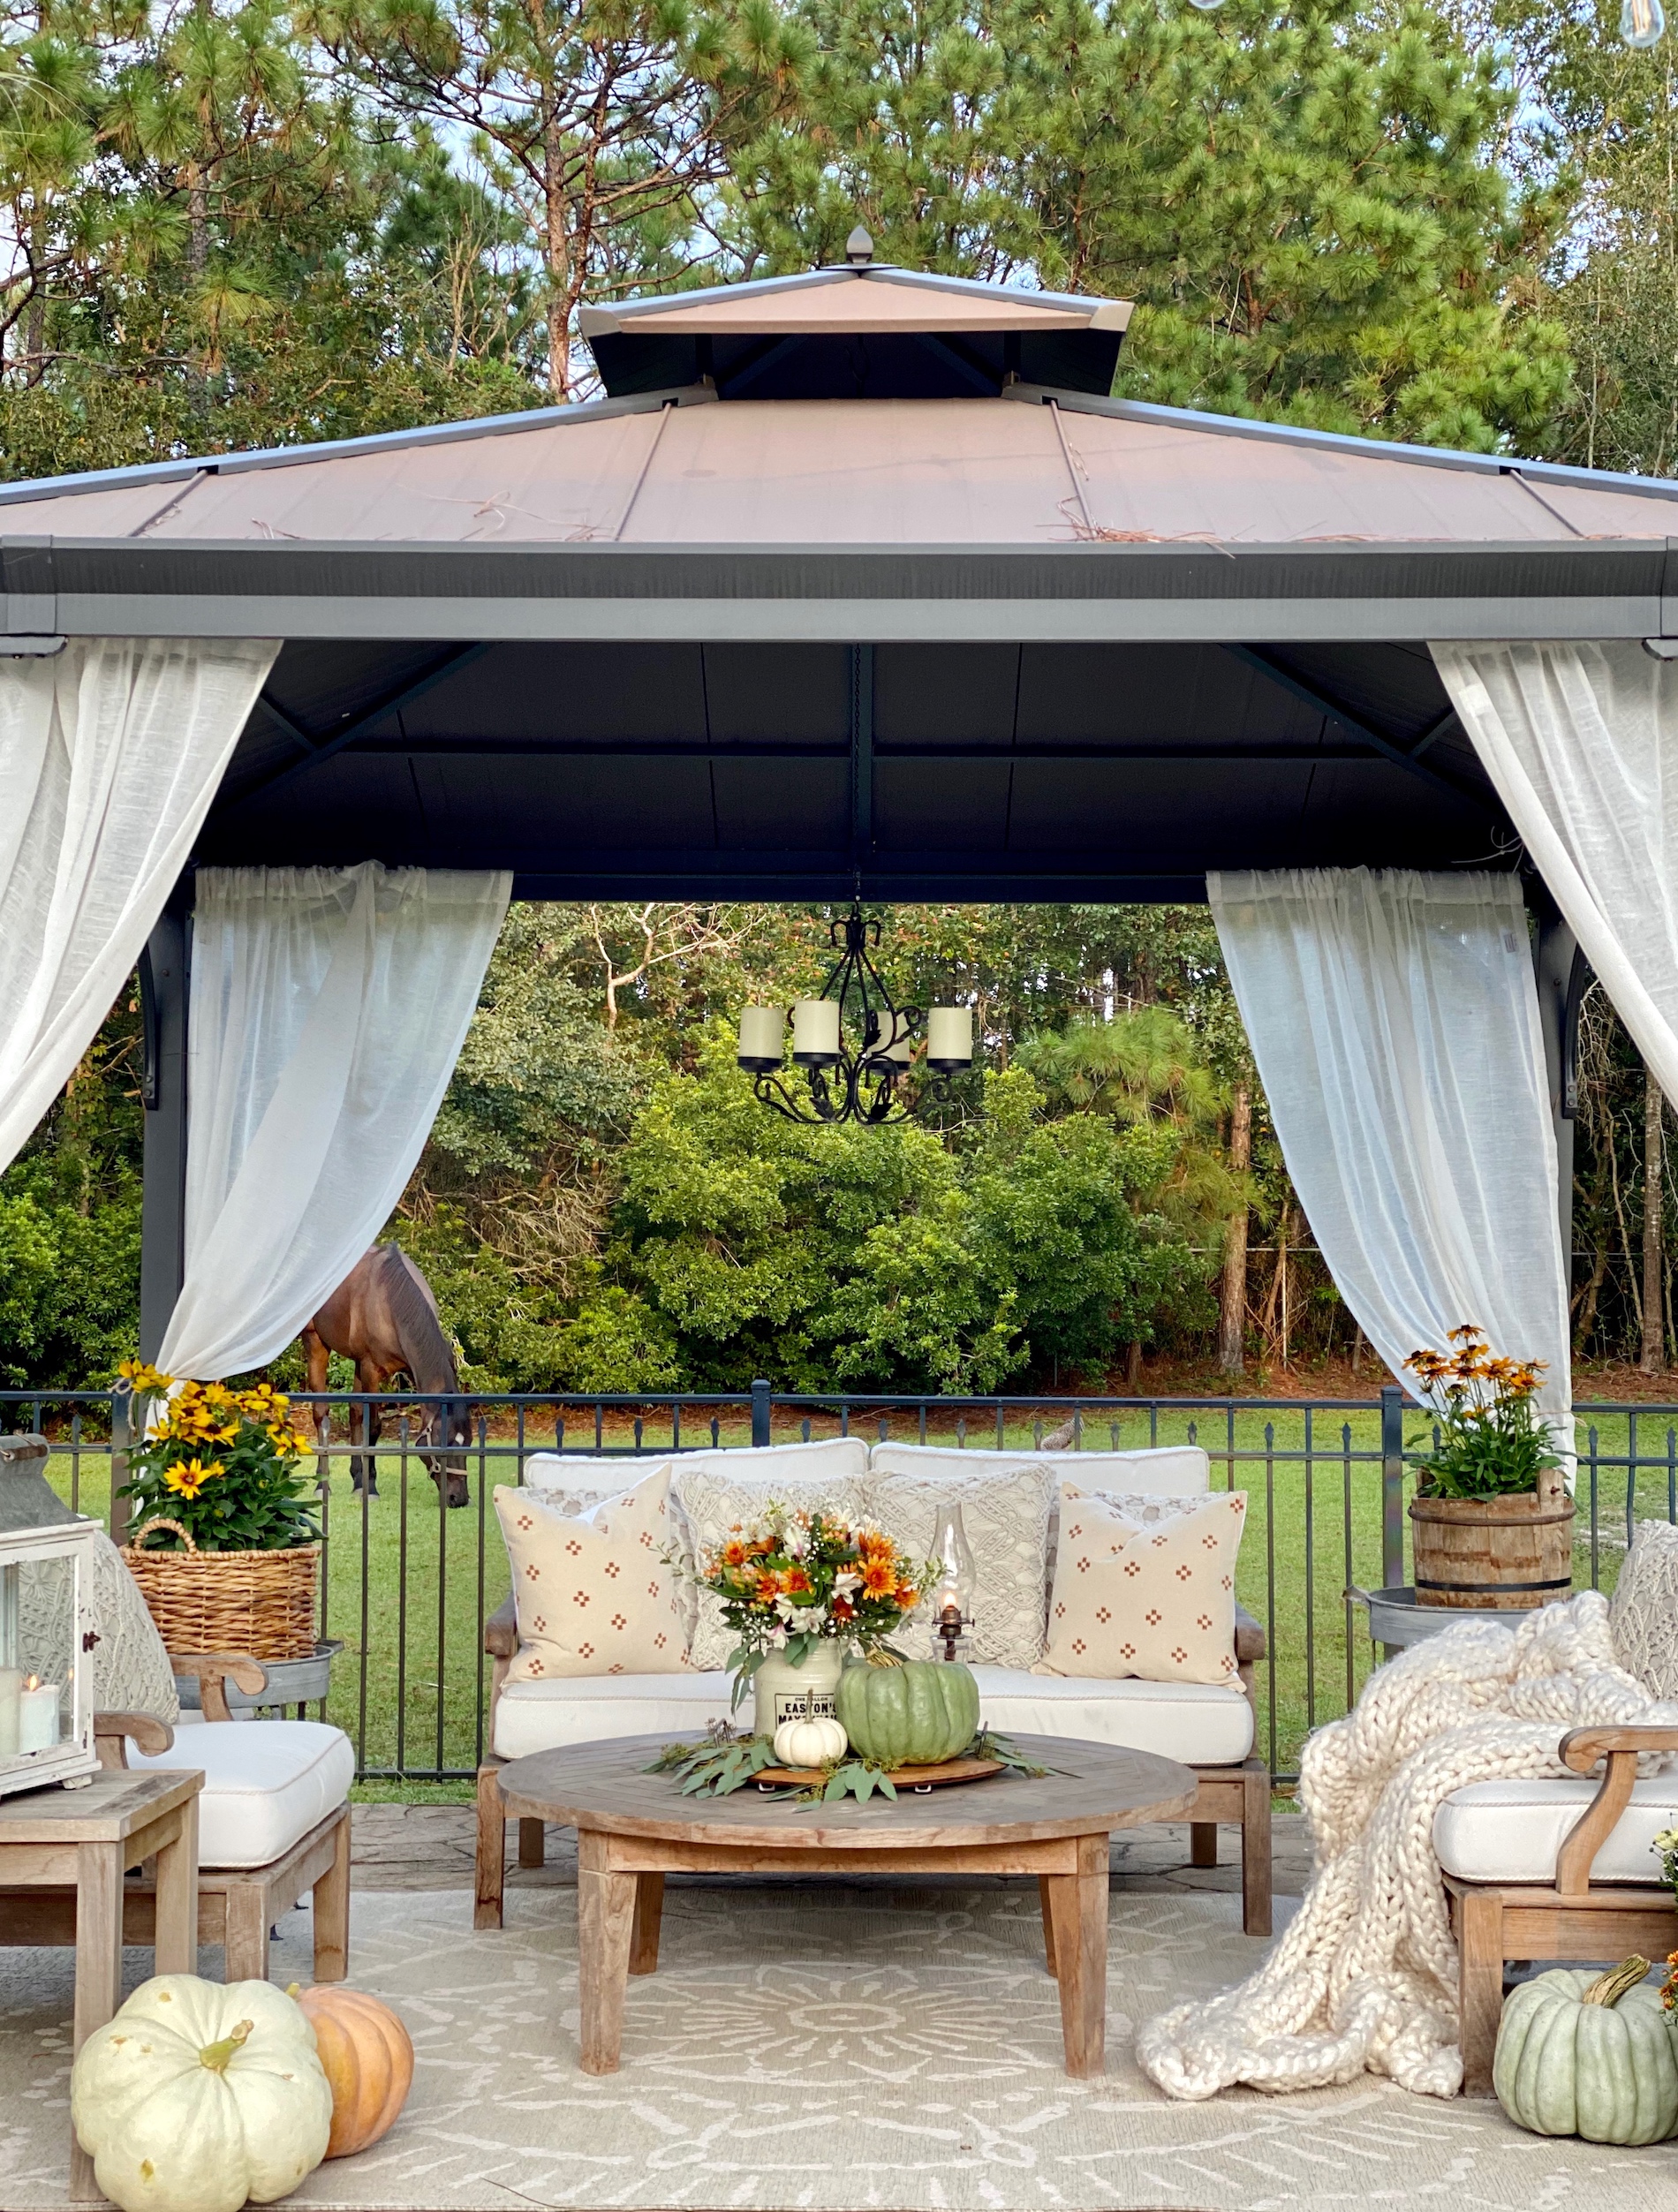 An outdoor seating arrangement under the gazebo decorated for fall with florals, pumpkins, mums, pillows and cozy blankets with a horse in the background.